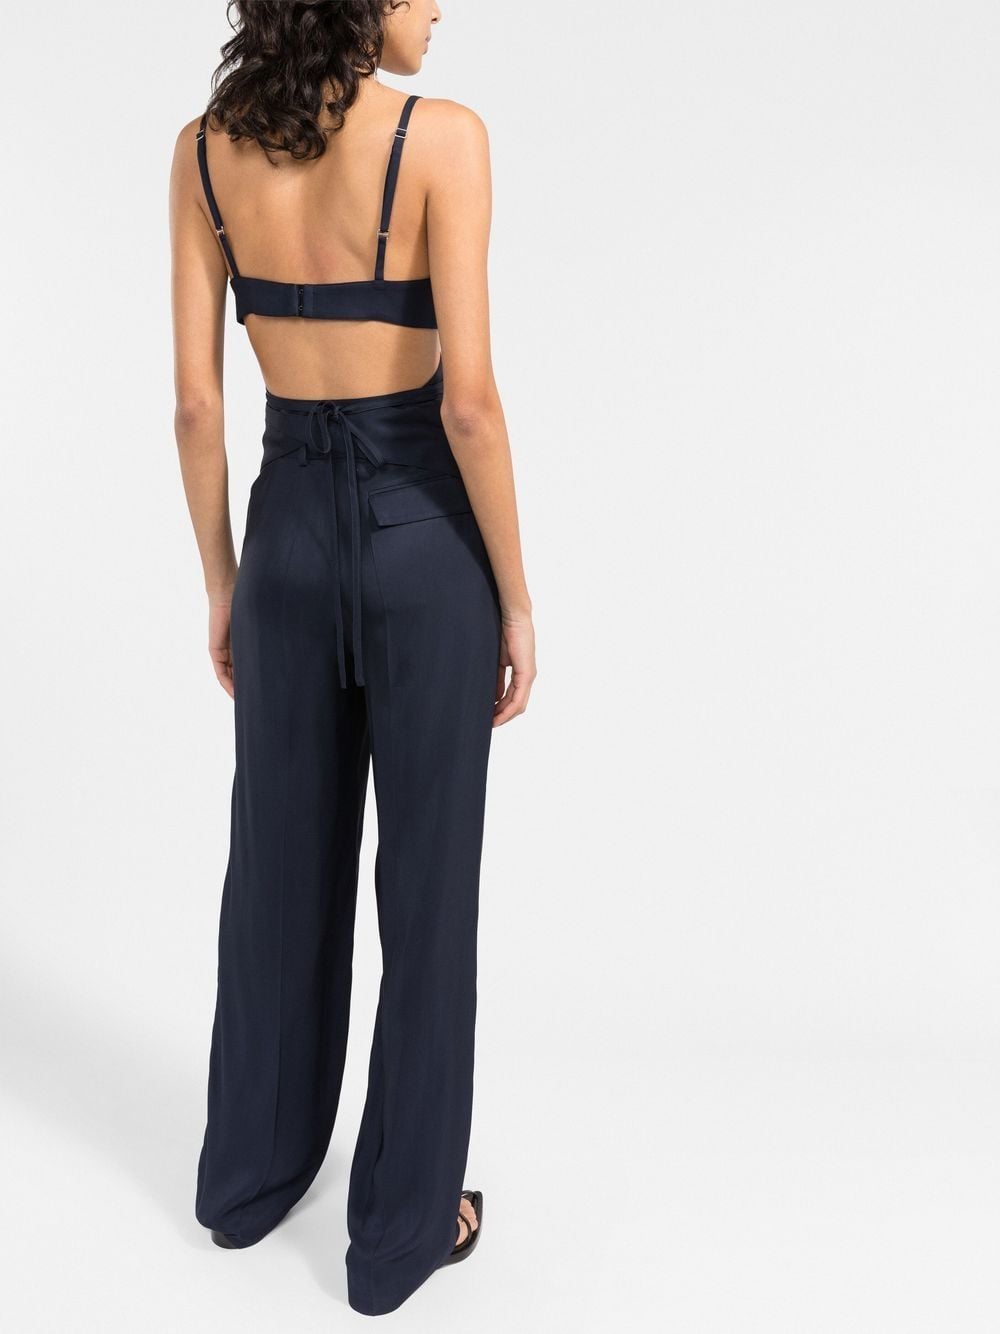 There Was One open-back Camisole Top - Farfetch